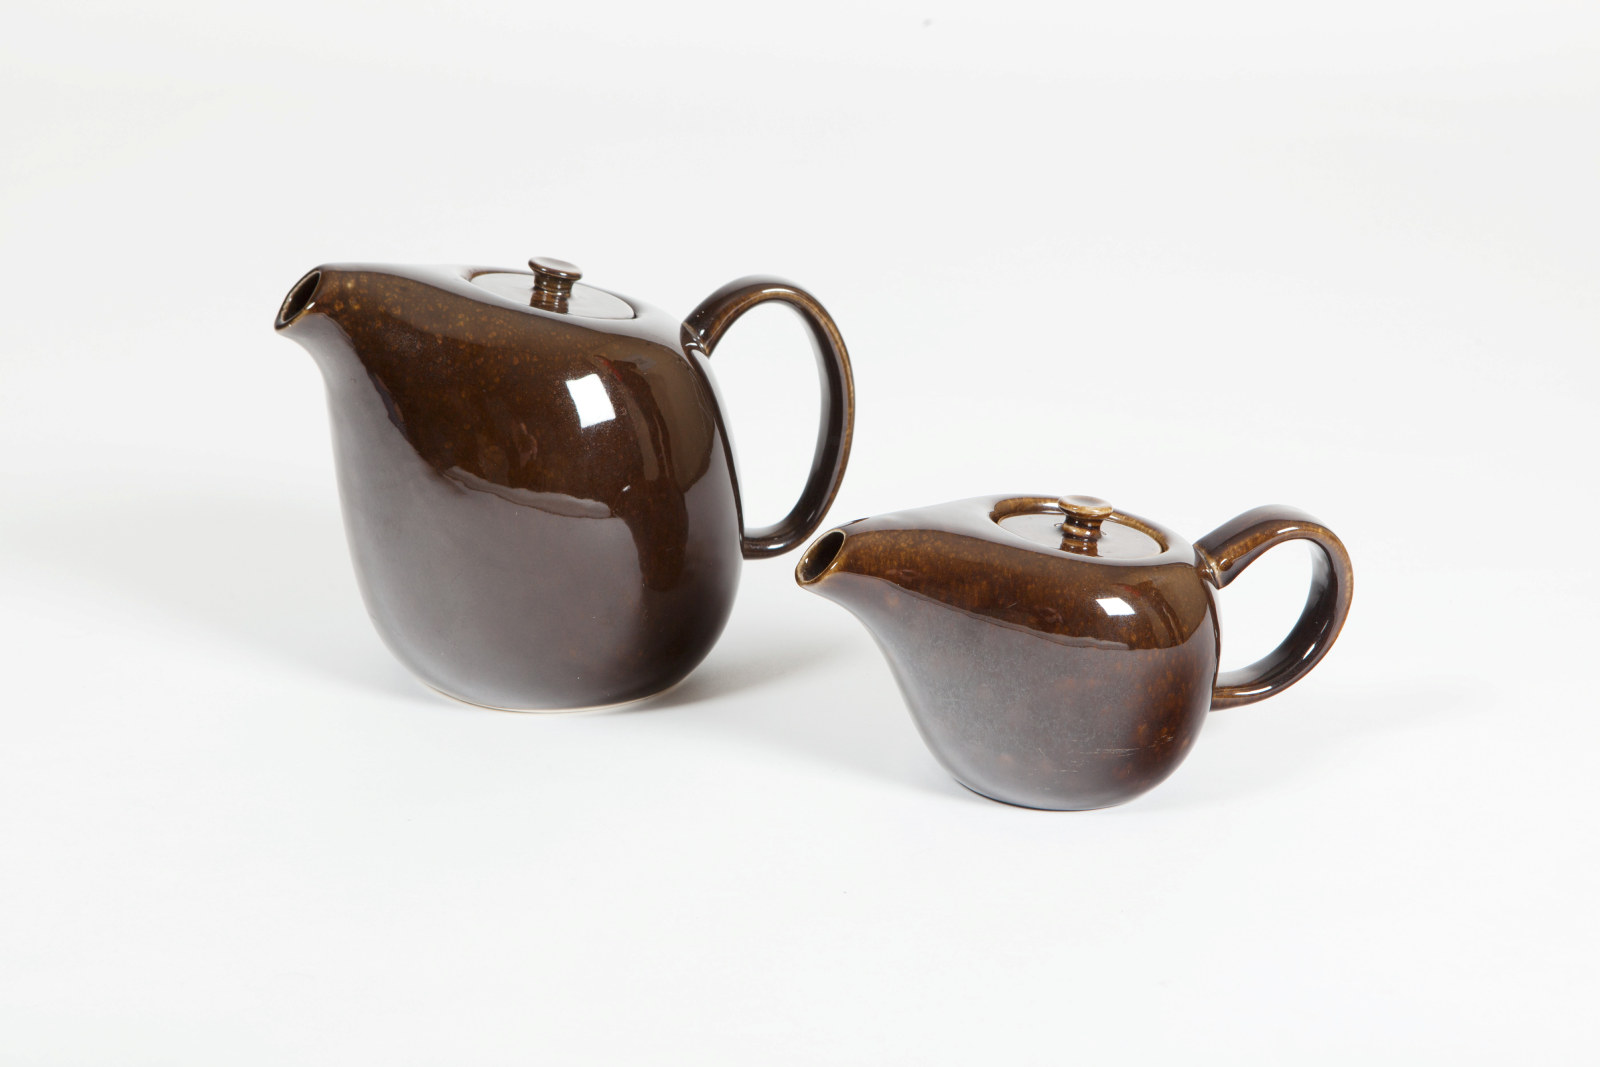 Teapot, 'American Modern' design by Russel Wright, manufactured by Steubenville Pottery Company, USA, 1946-1948